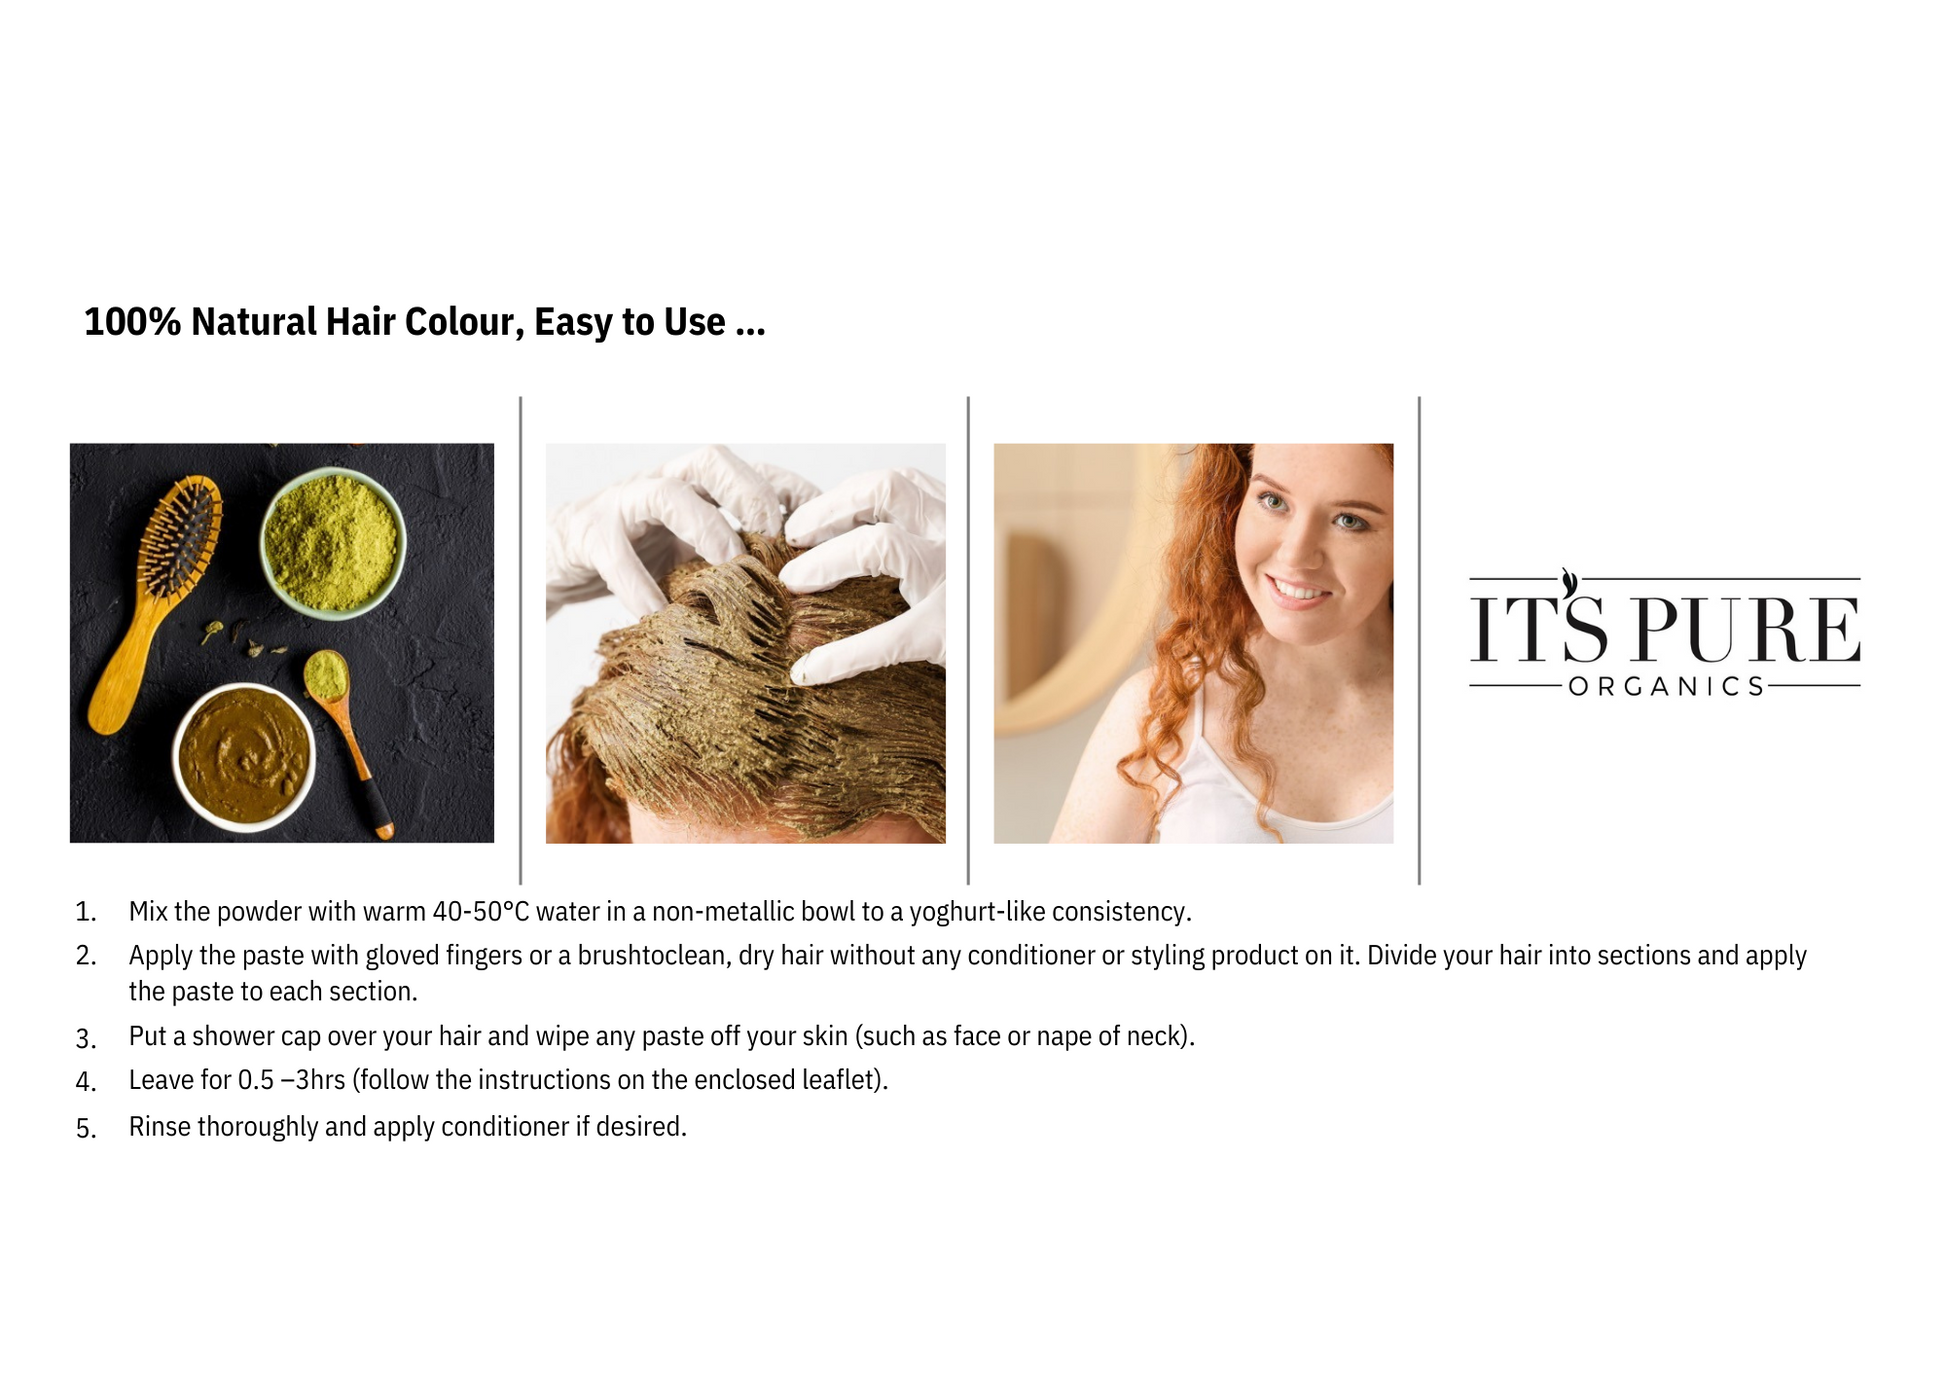 infographic step by step instructions on how to use it's pure organics, 100% natural hair colour.